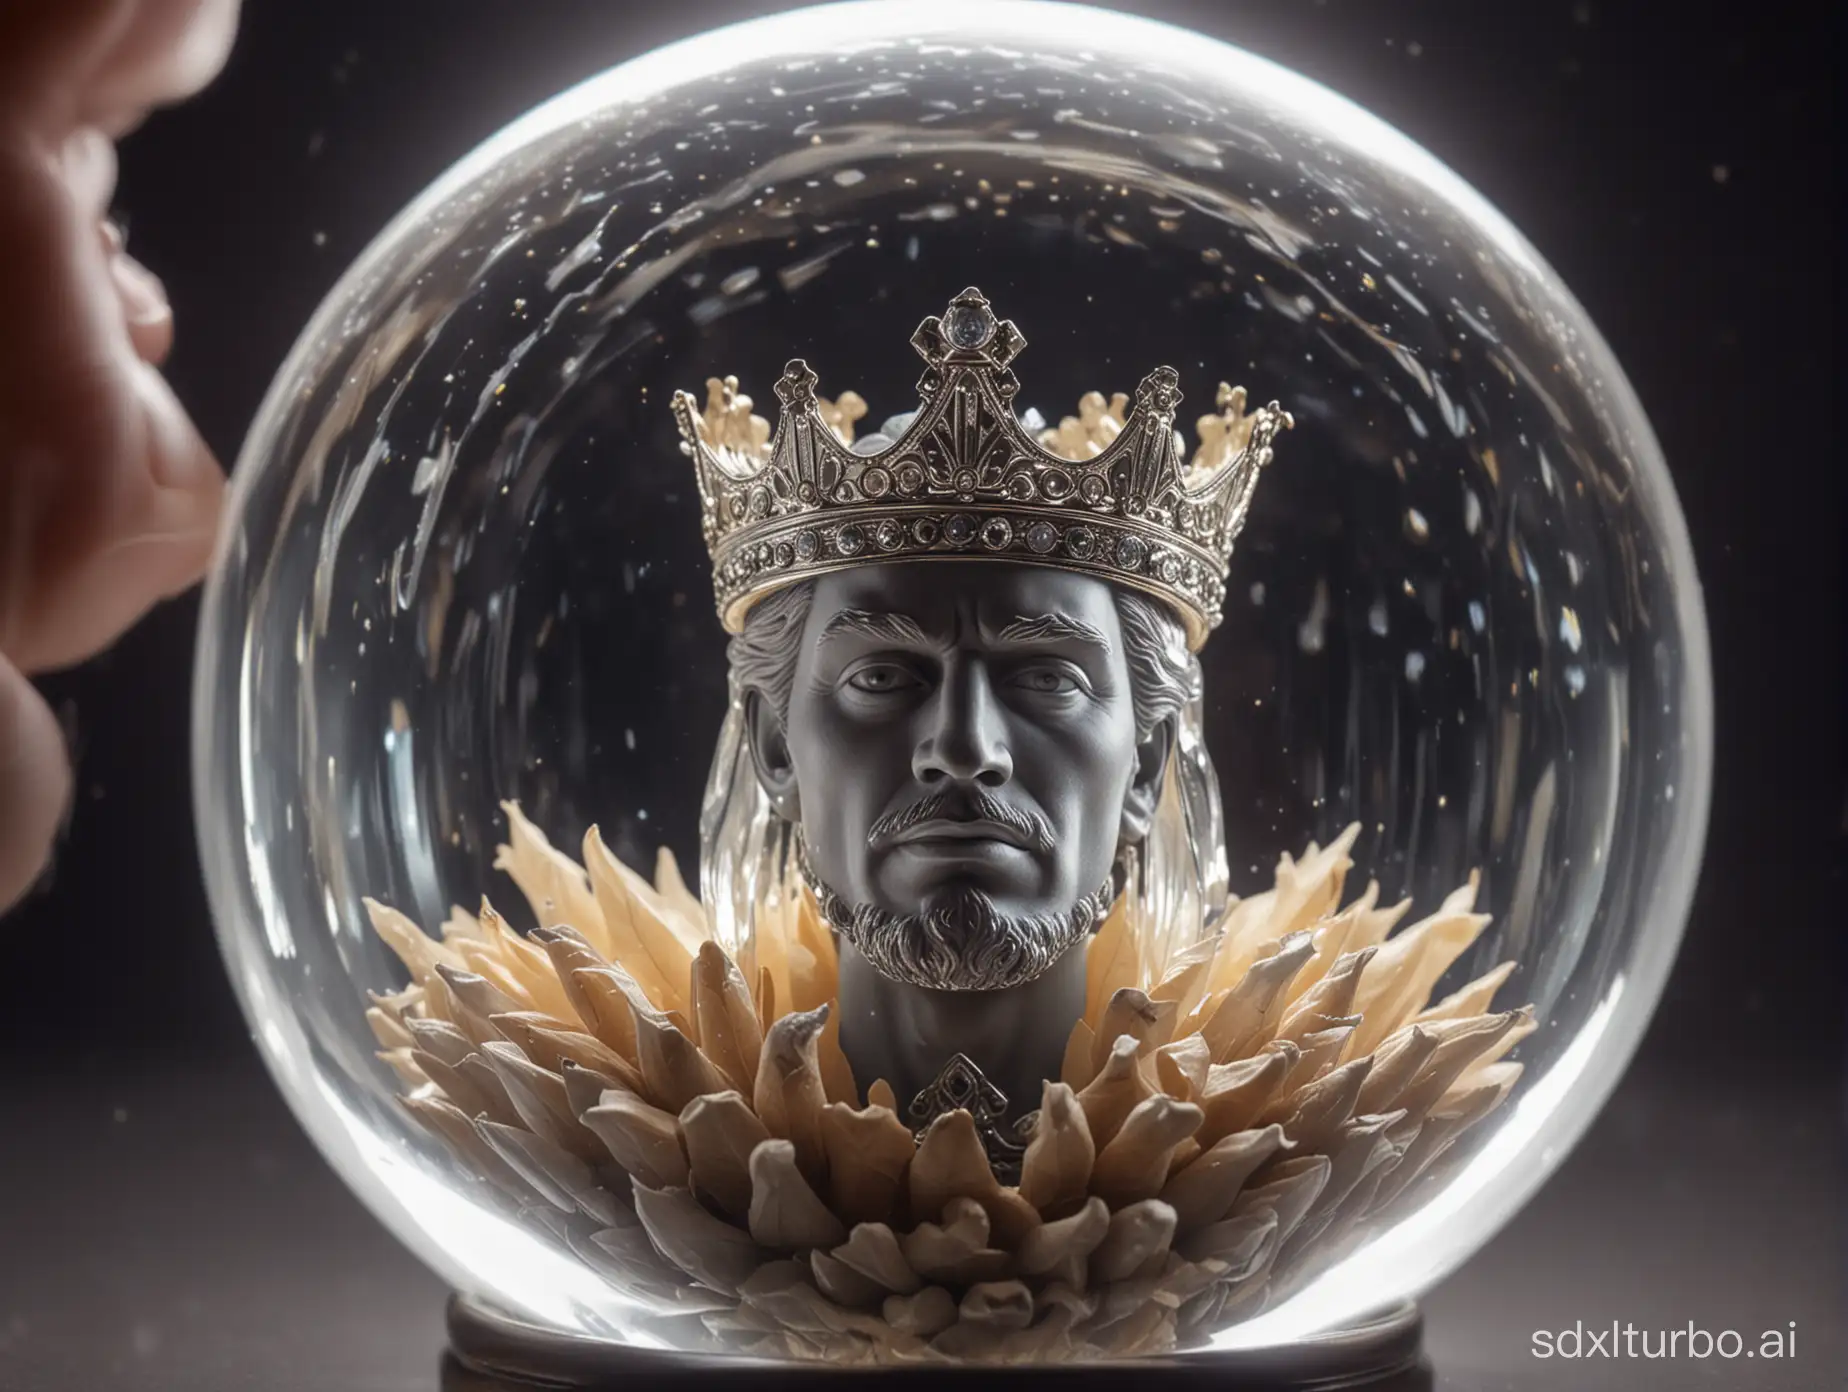 King-Customers-Wishes-Revealed-Through-Crystal-Ball